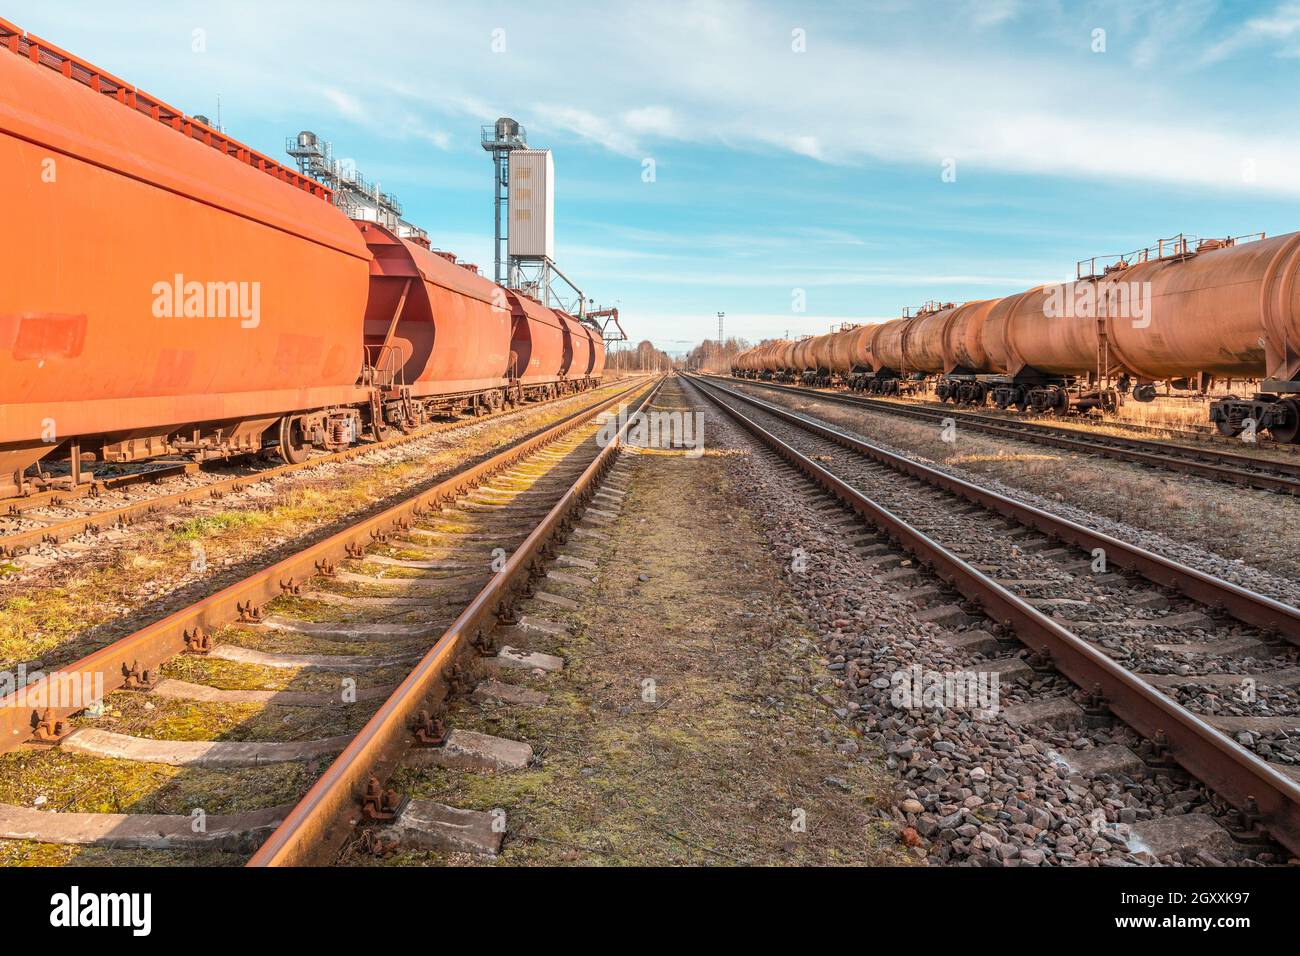 Railway Station with Freight Trains. Transportation of grain and oil or gas. Stock Photo